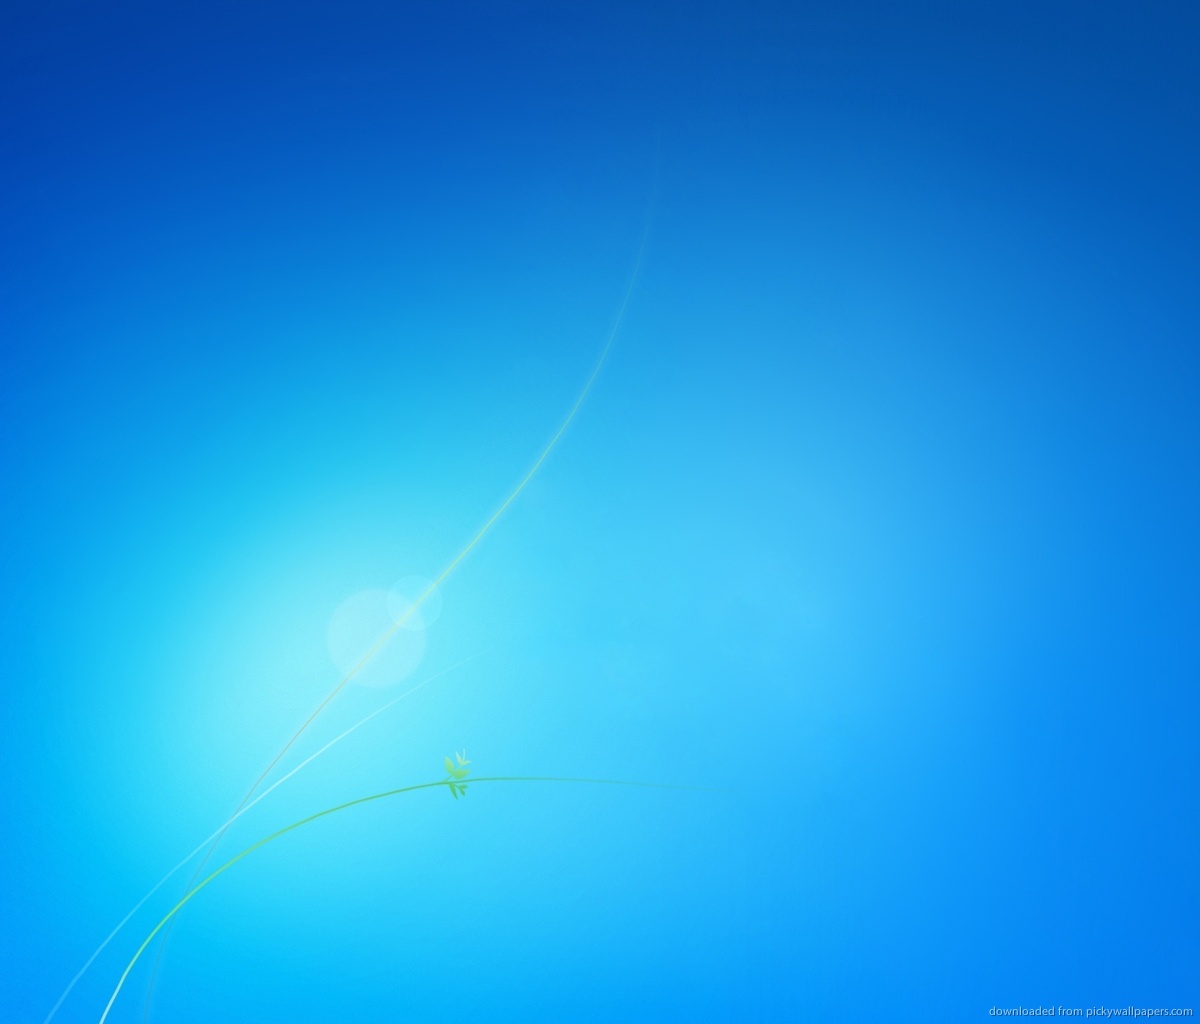 Download Windows 7 Official Screensaver For Amazon Kindle 3 Apps